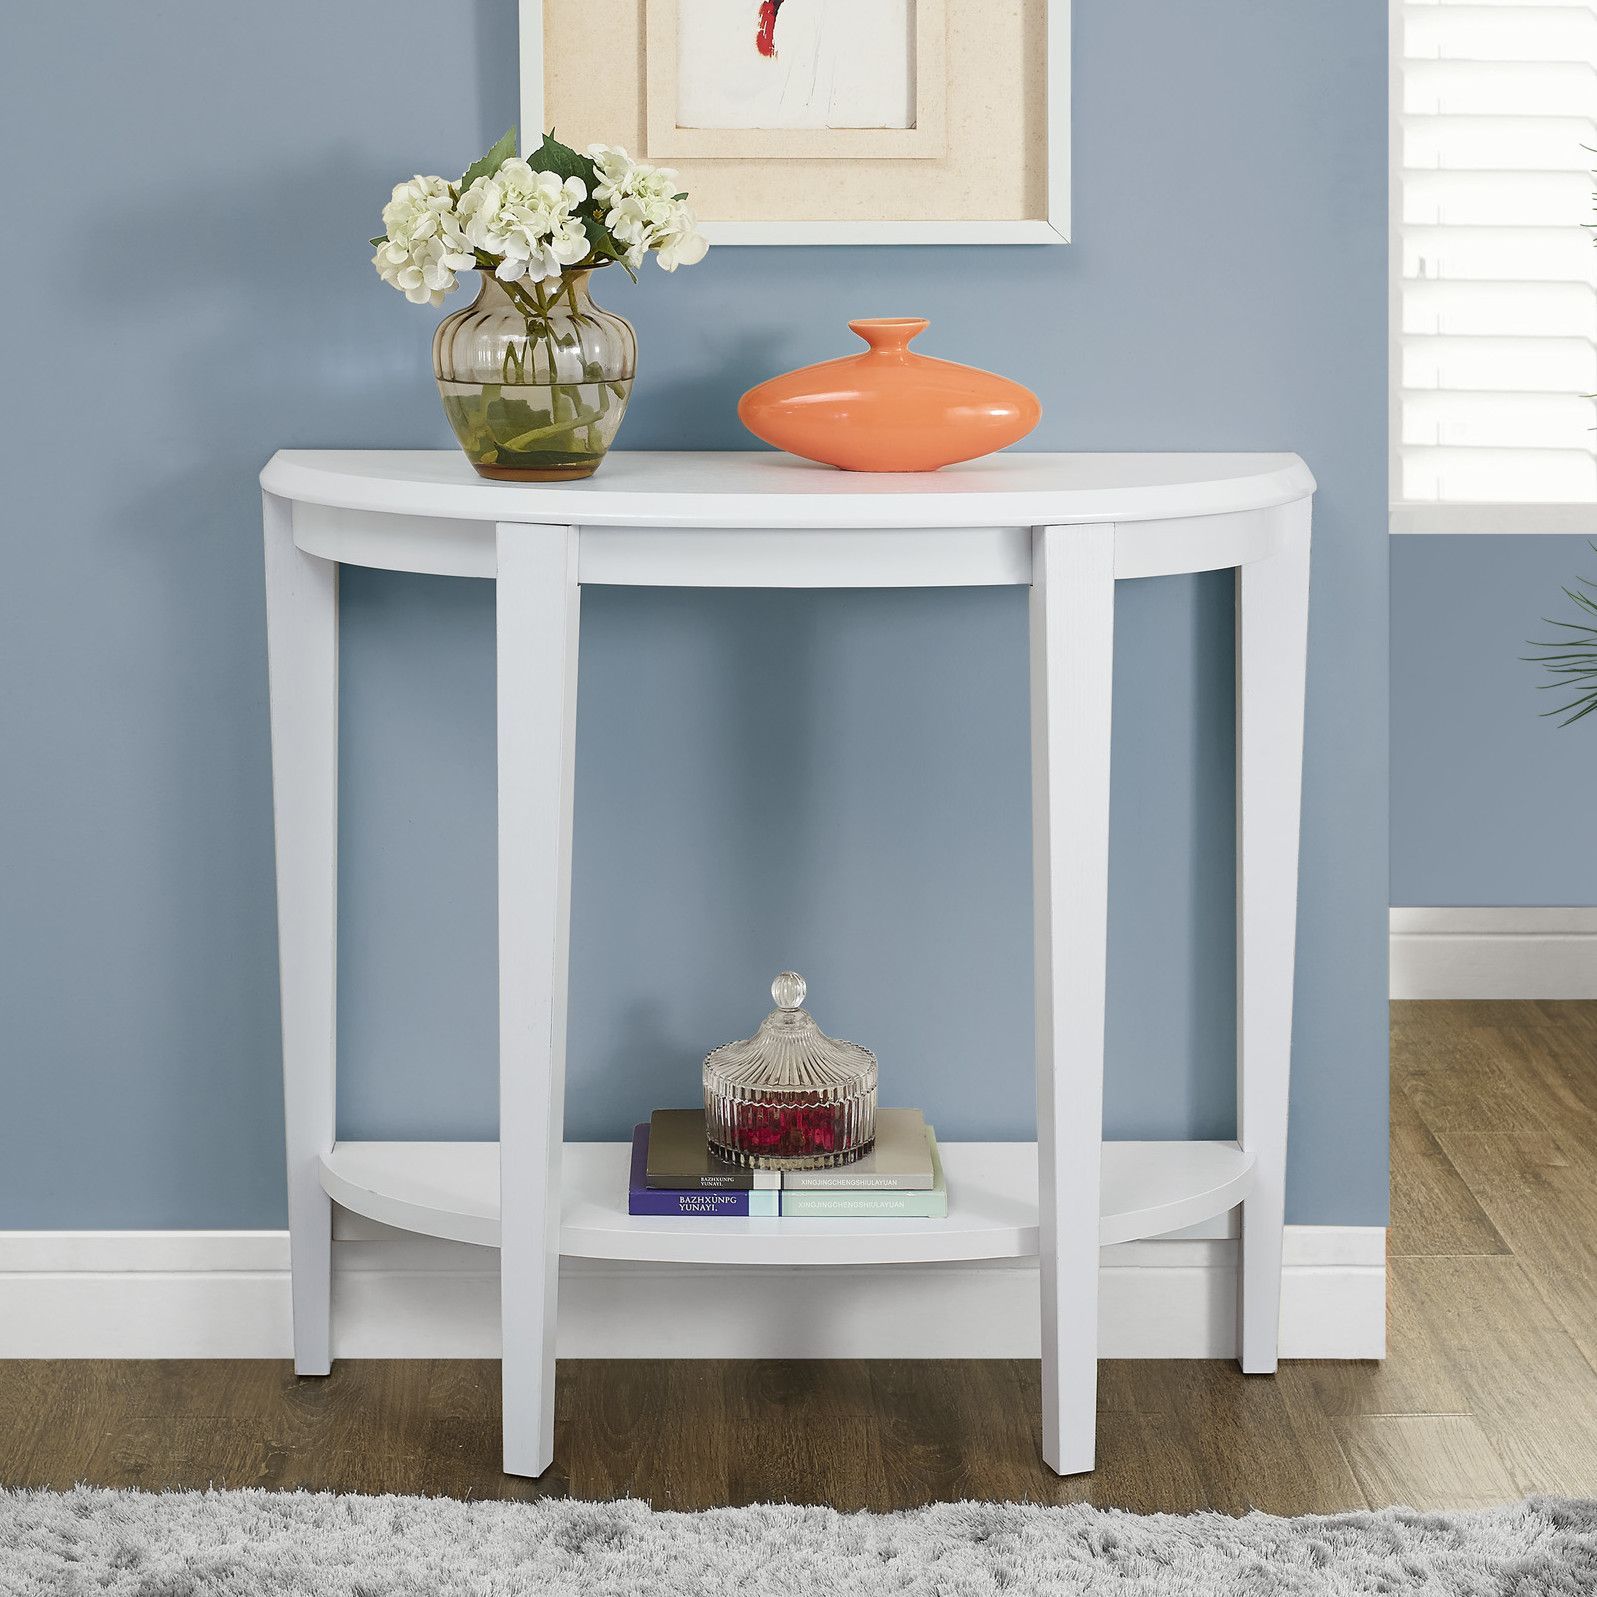 blakeway half moon console table products white accent retro nest tables hobby lobby furniture end great mohawk home rugs yellow decor accessories emerald coffee deck chairs metal